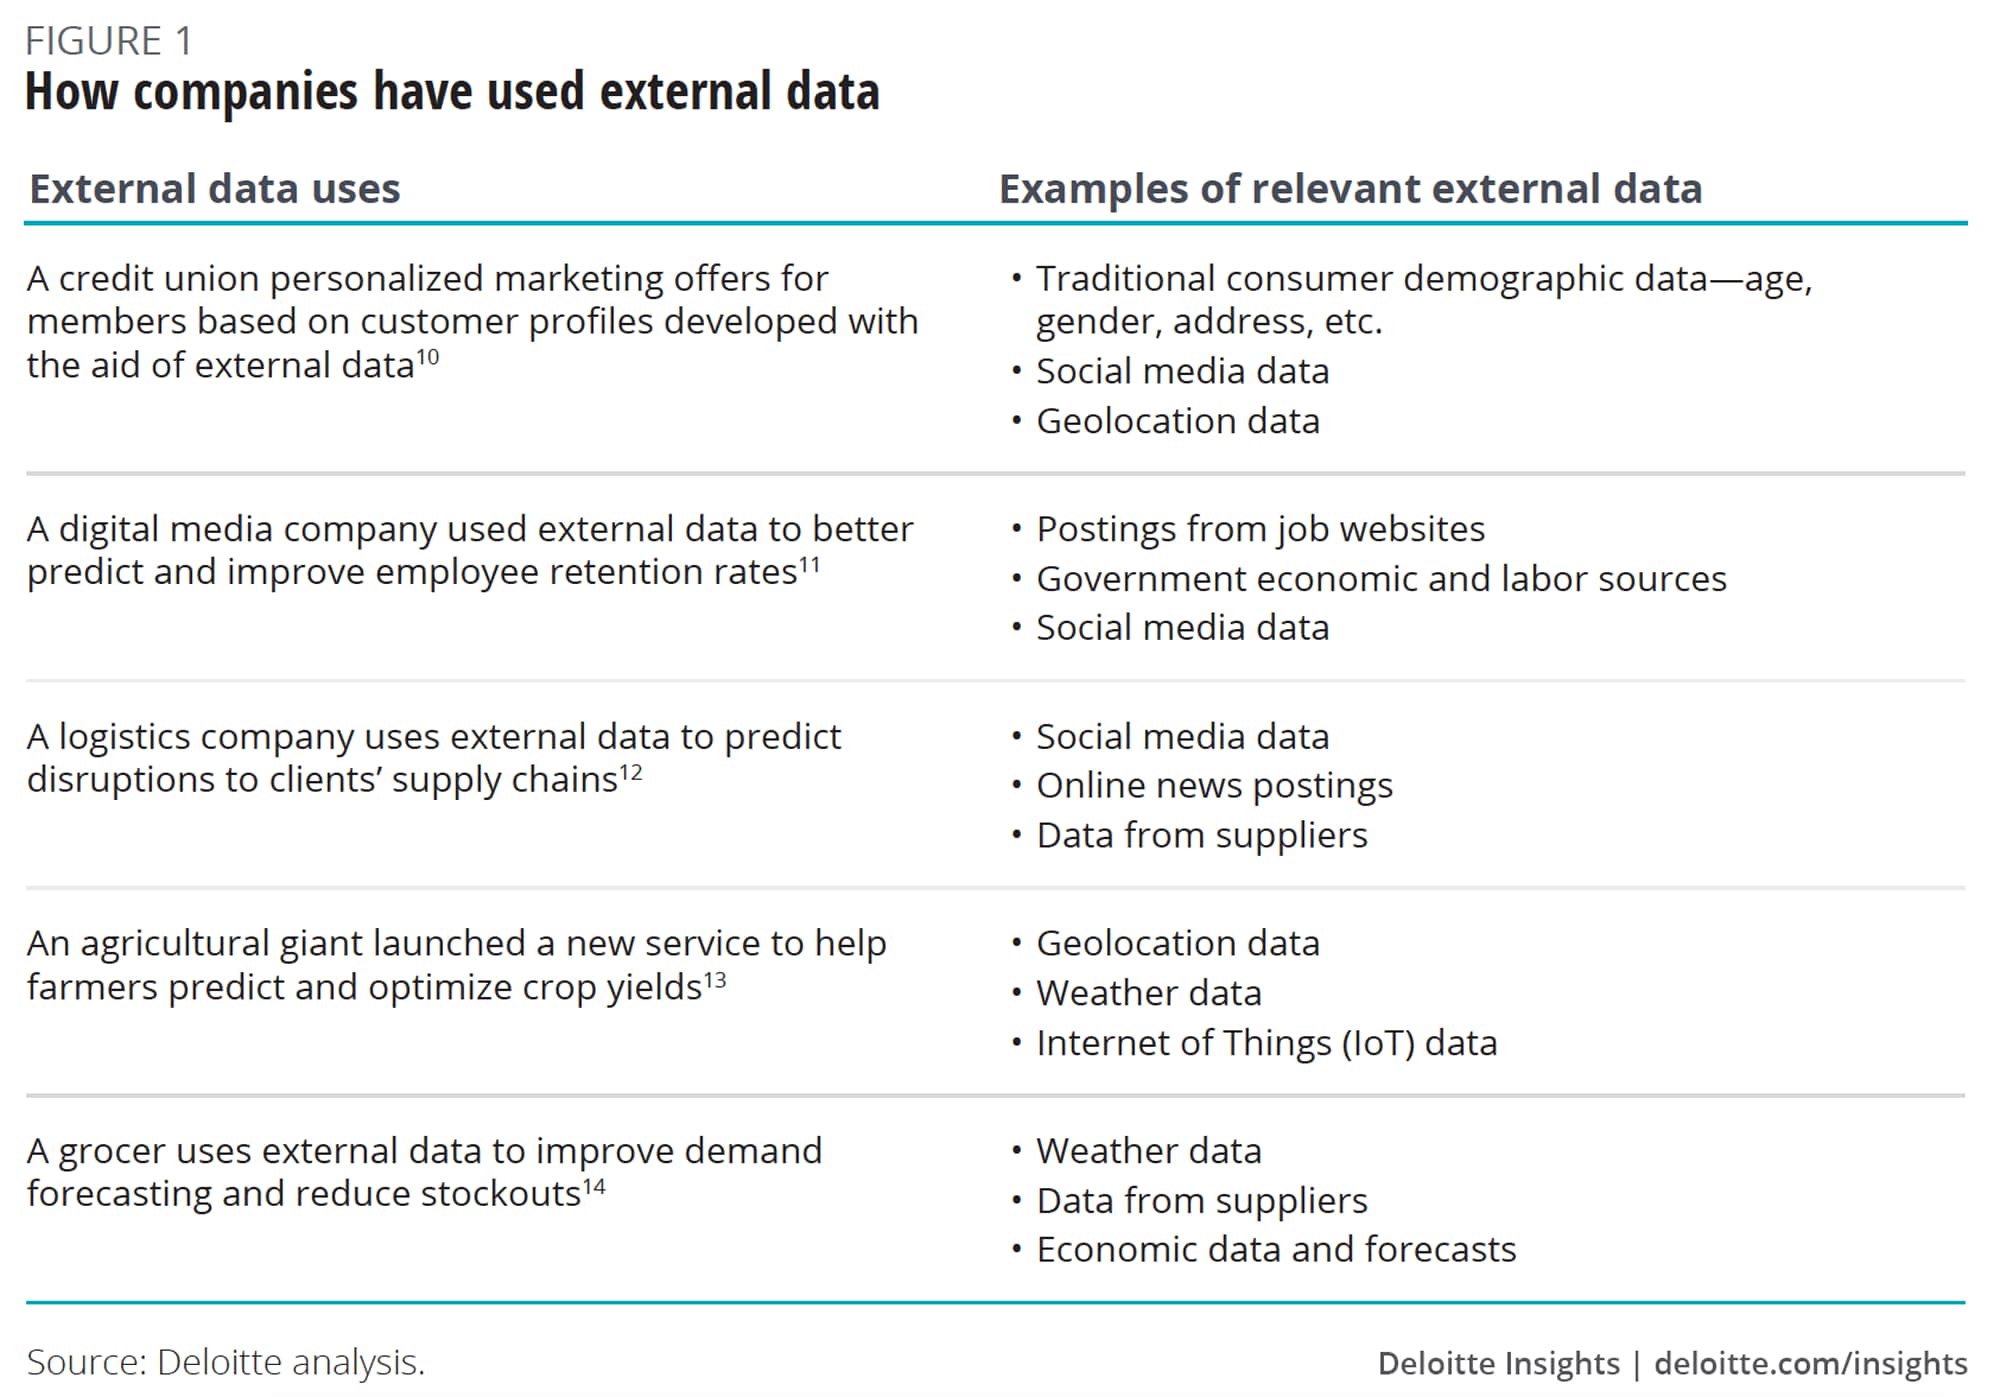 How companies have used external data